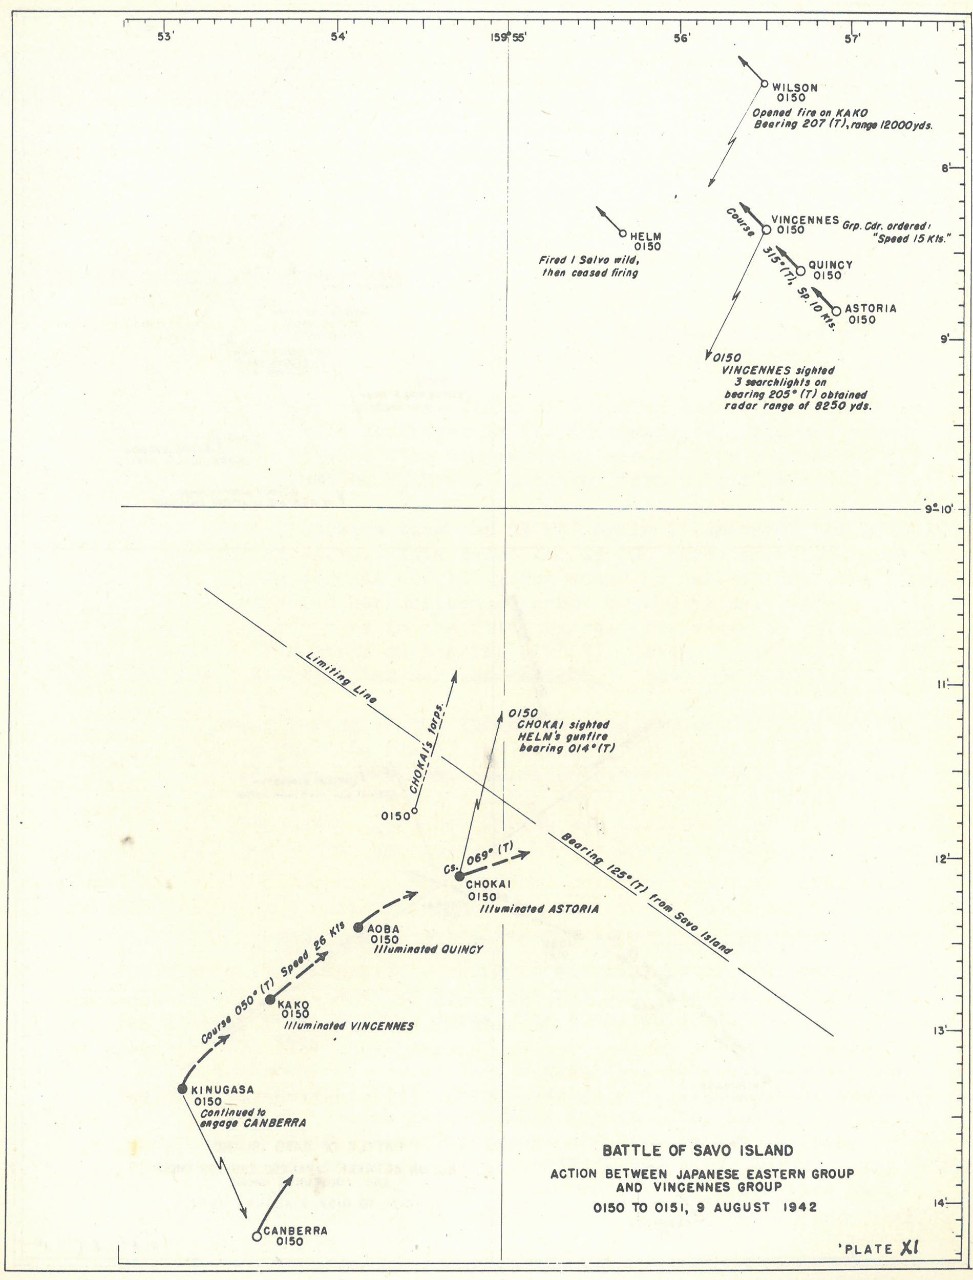 Plate 11: Battle of Savo Island, Action Between Japanese Eastern Group and Vincennes Group, 0150 to 0151, 9 August 1942 - chart - The Battle of Savo Island August 9, 1942 Strategical and Tactical Analysis